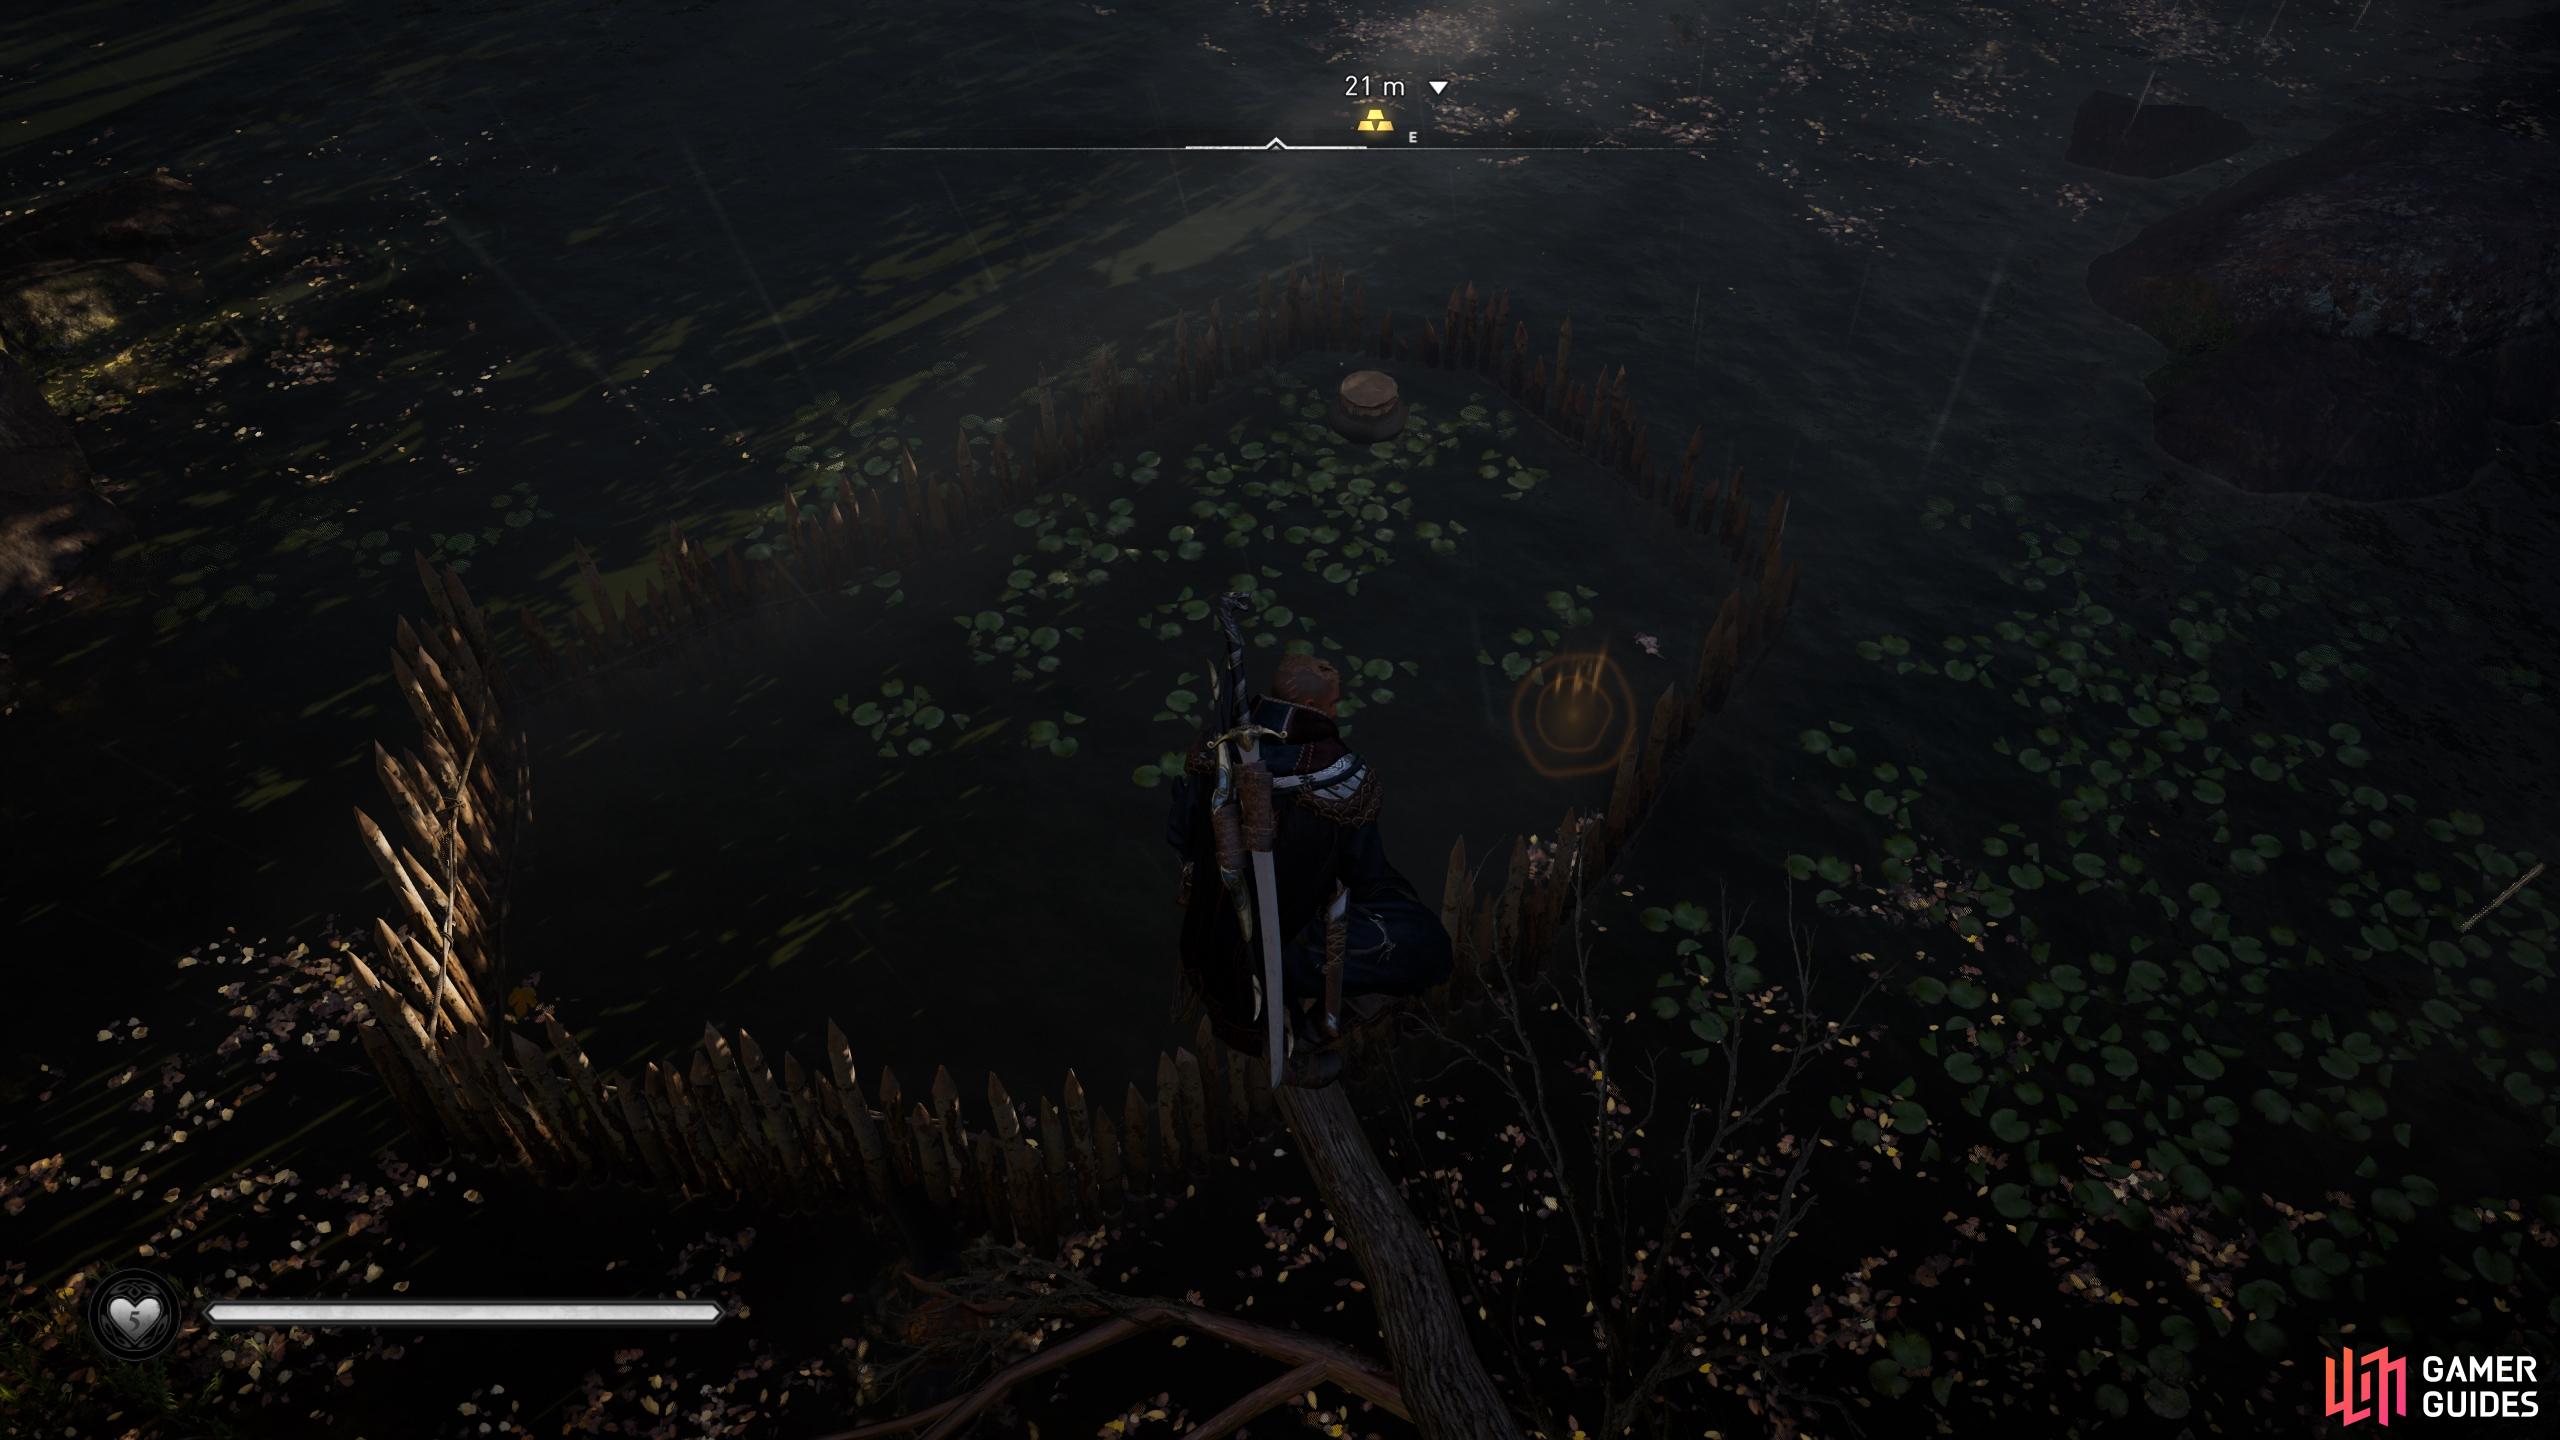 To access the chest, jump into the water from a tree branch above.